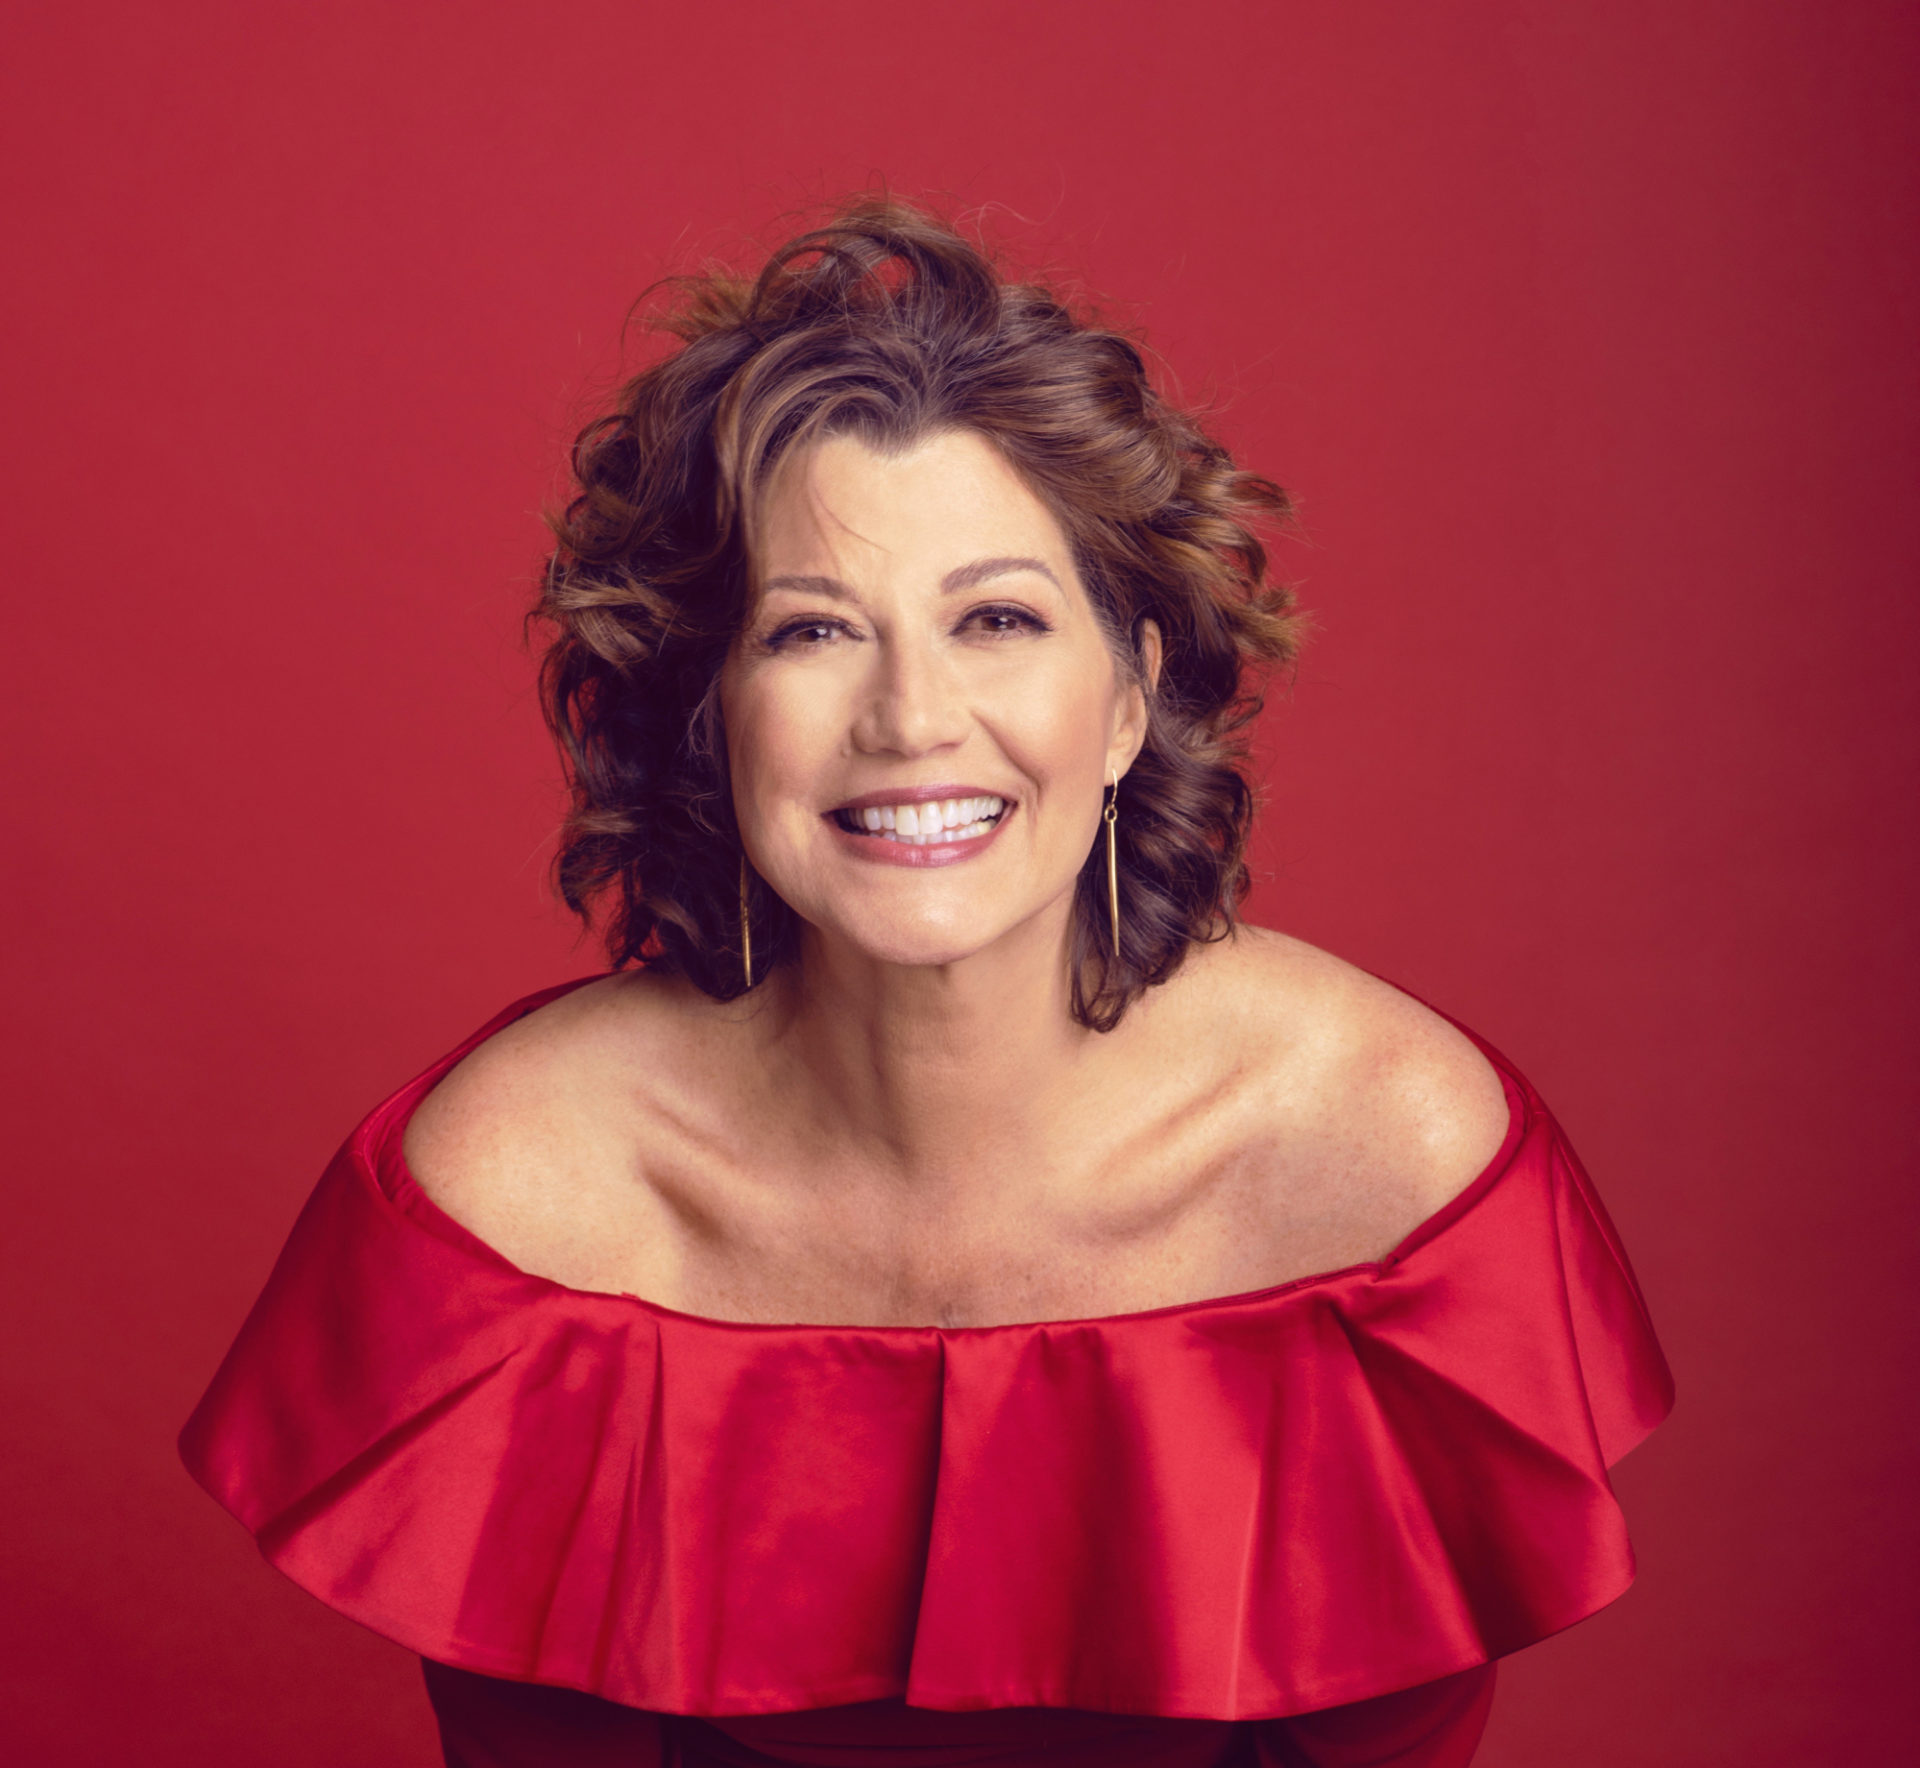 Grammy winner Amy Grant will perform at the Virginia Theatre in October 